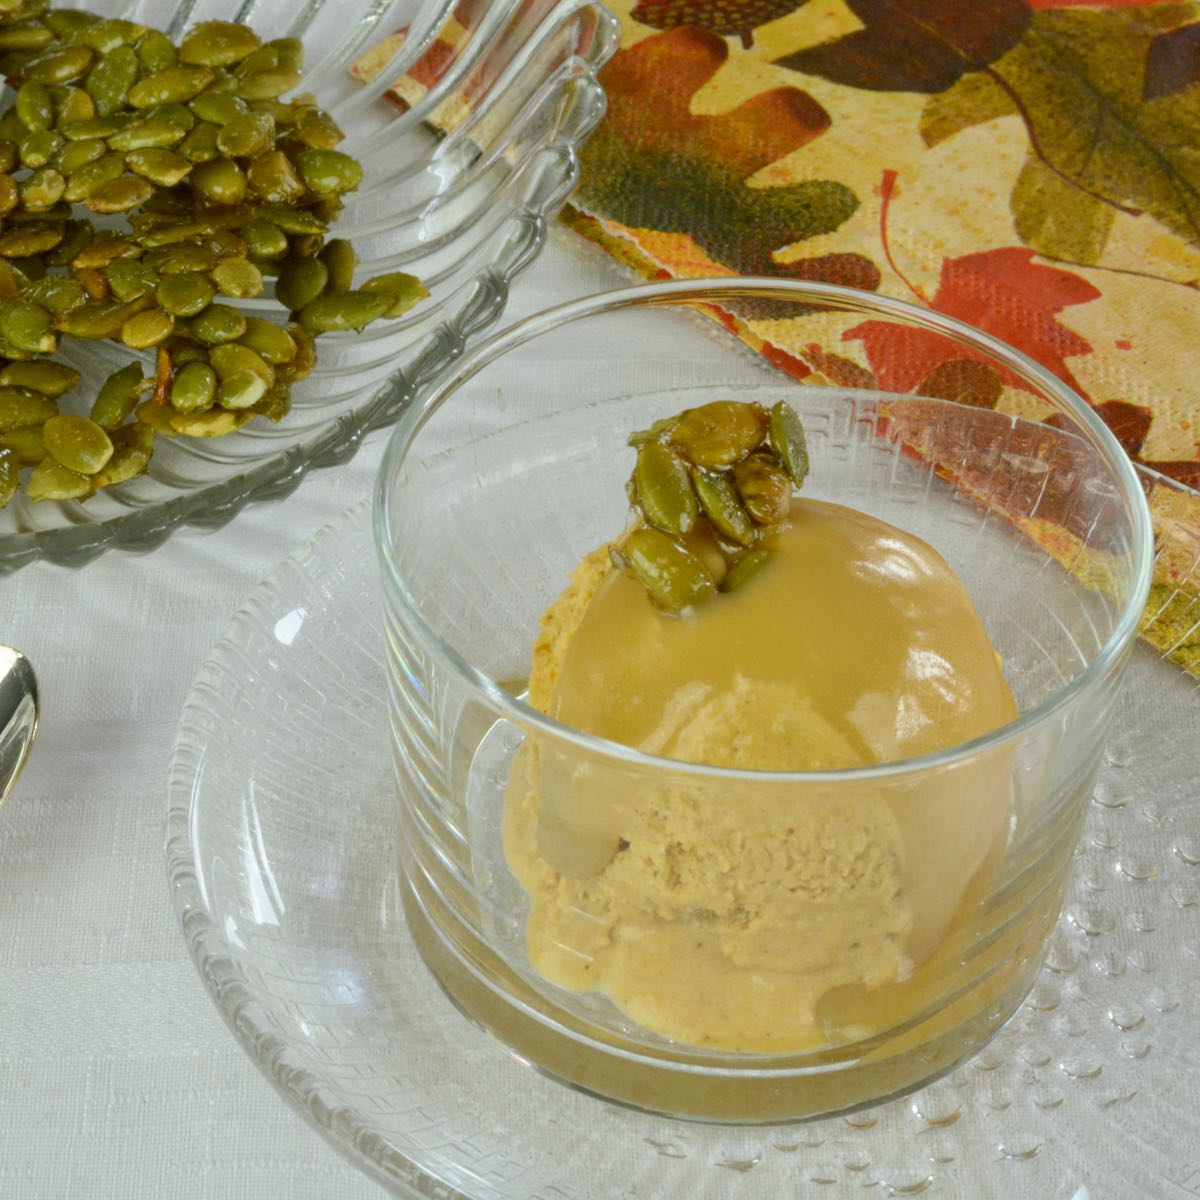 A dish of Homemade Pumpkin Ice Cream with Bourbon Caramel Sauce topped with sweet and salty candied pumpkin seeds.